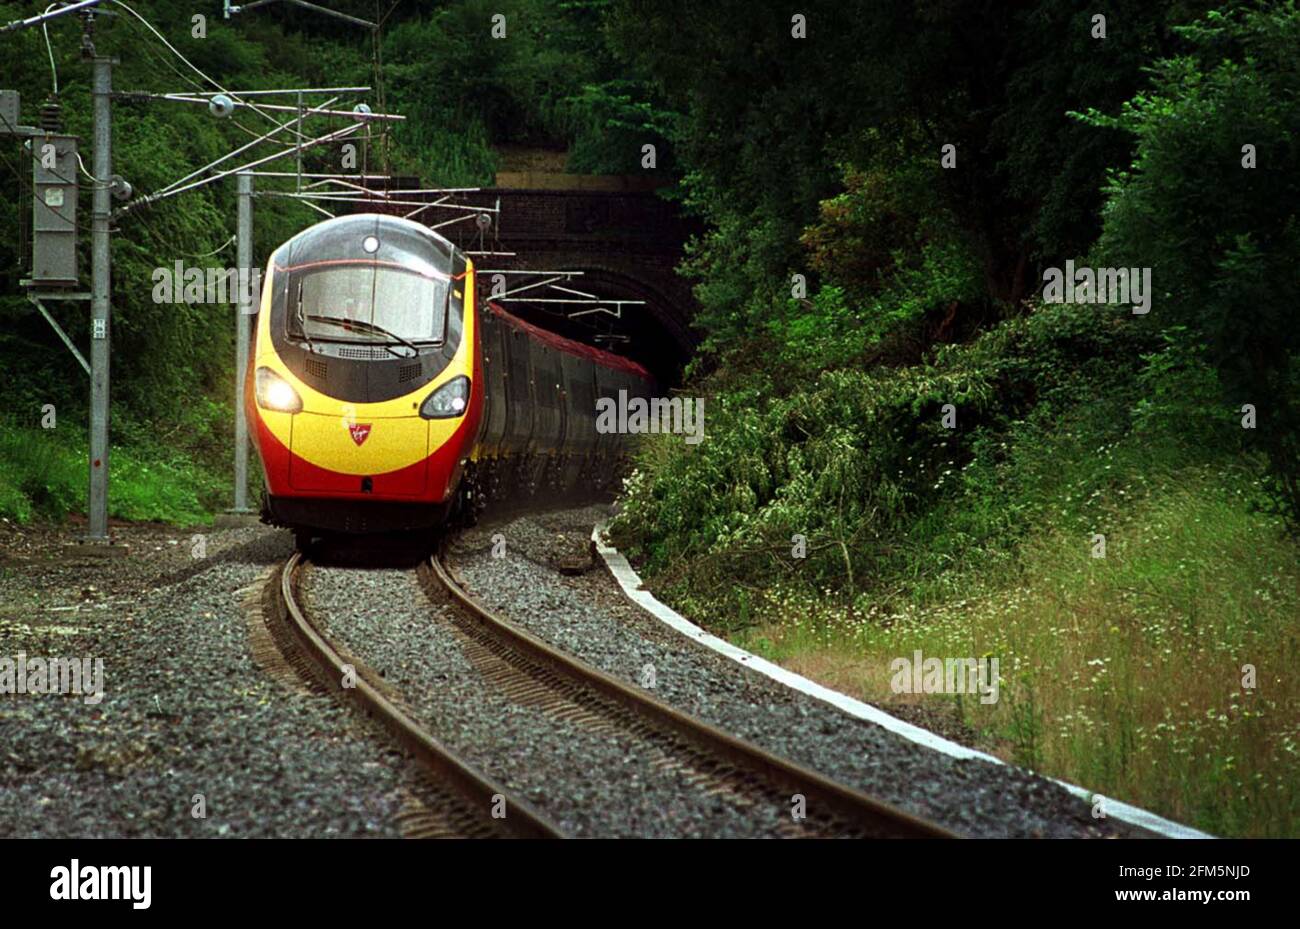 TWO OF VIRGINS NEW PENDOLINO TRAINS AT A PRESS LAUNCH NR MELTON MOWBRAY. Stock Photo